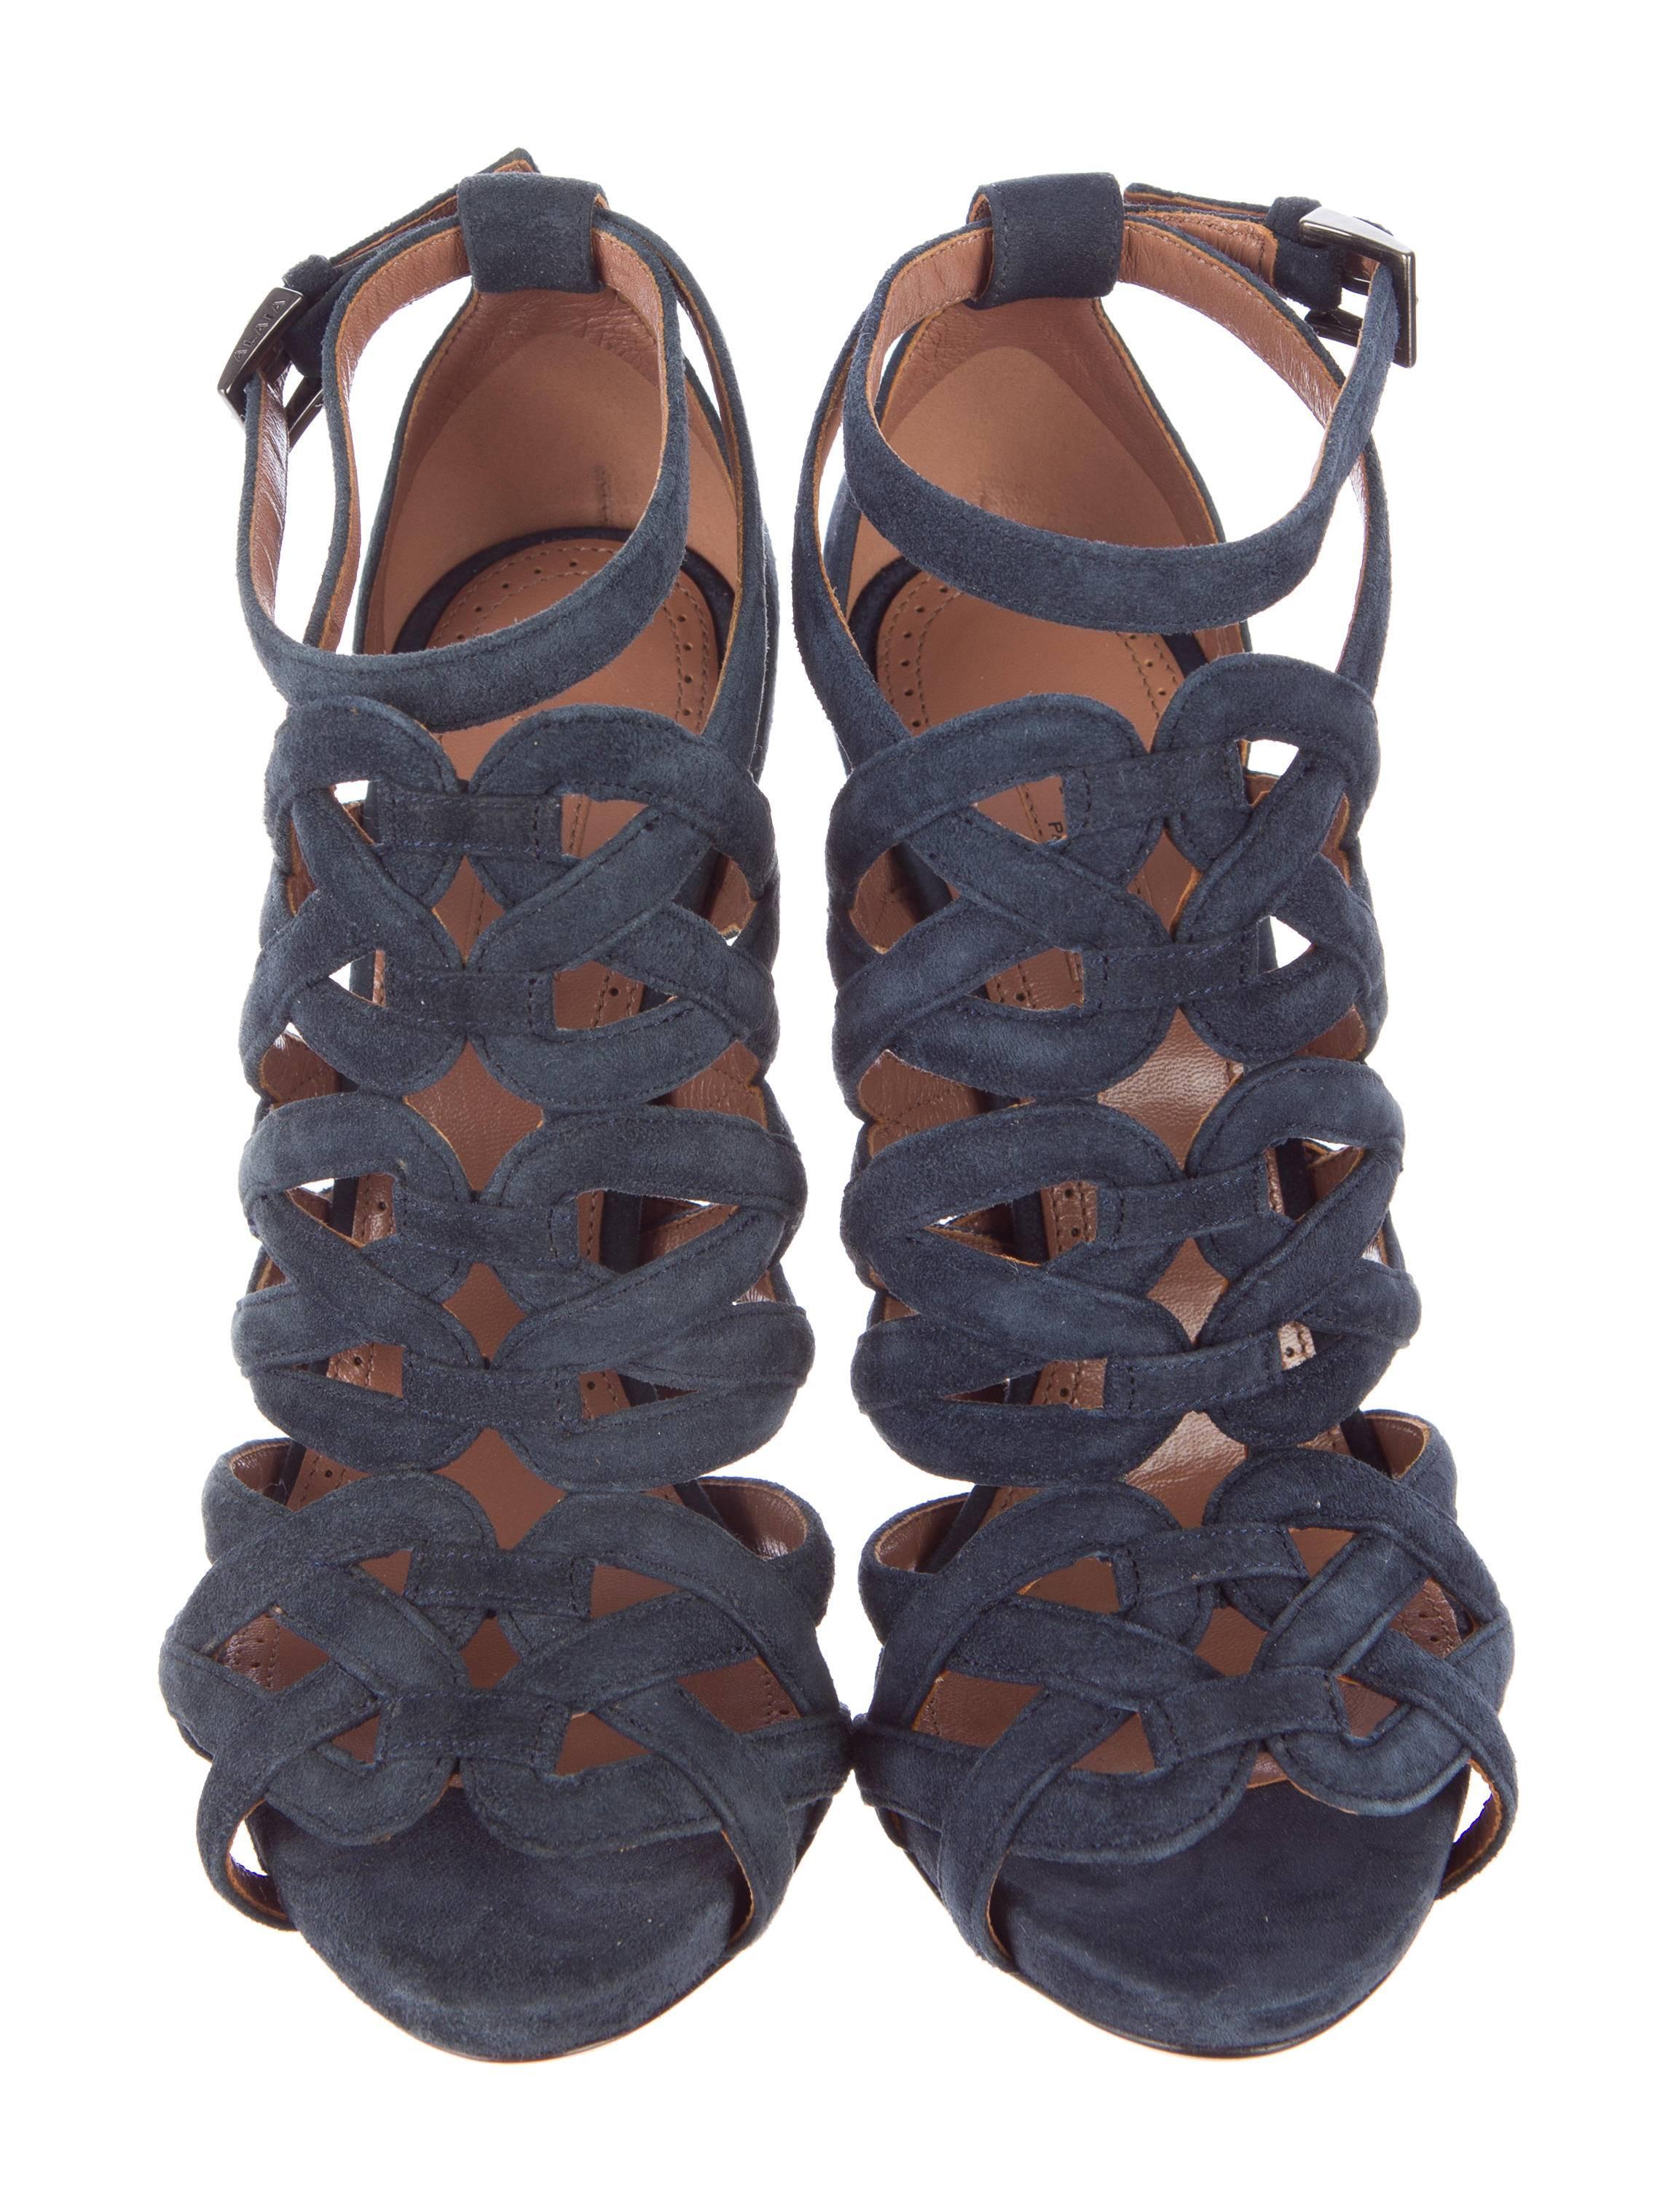 CURATOR'S NOTES

Something old, something new and something blue!  Gorgeous NEW and SOLD OUT blue suede Alaia sandals at a fraction of the retail price.

Includes original Alaia dust bag and box!

Retail price $1,875
Size IT 35.5 (US